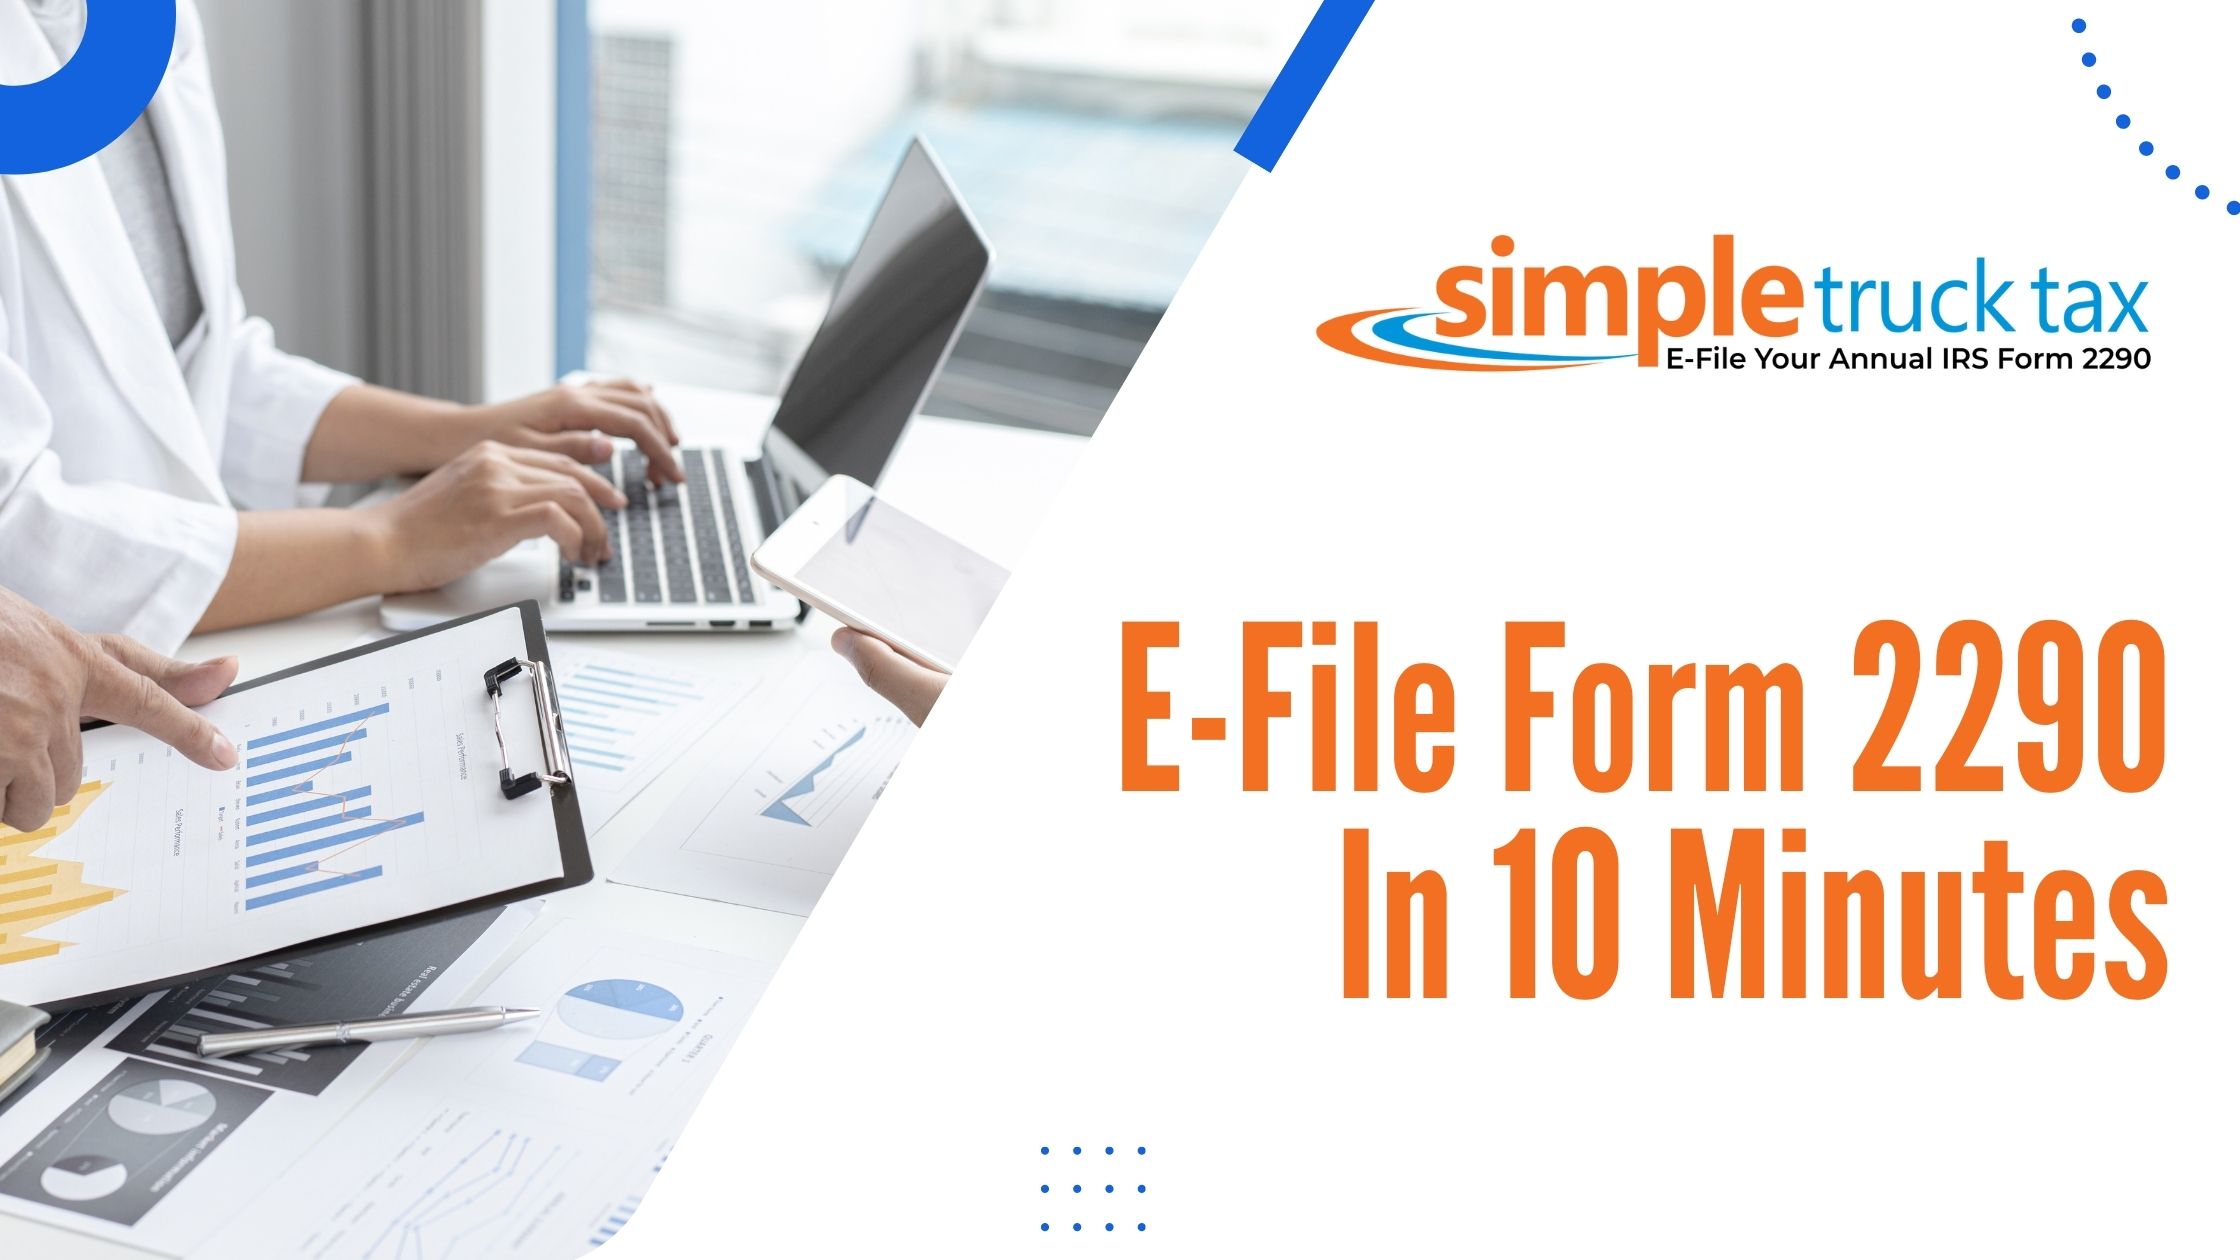 E-FILE FORM 2290 IN 10 MINUTES